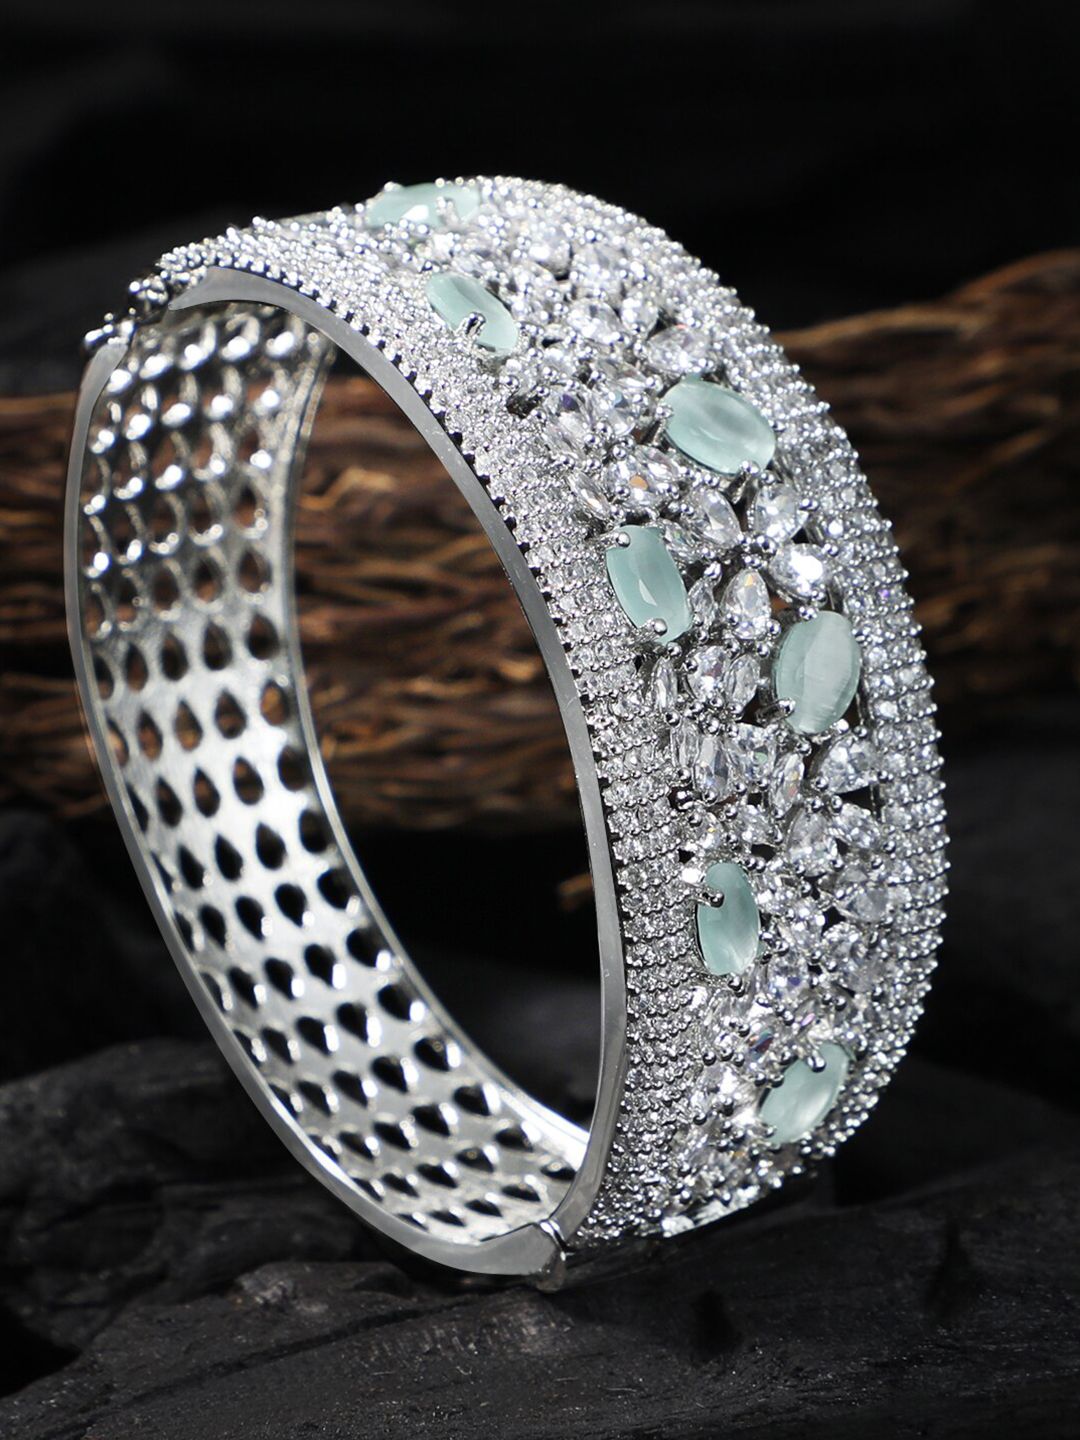 Adwitiya Collection Women Silver-Toned & Green Rhodium-Plated Bangle-Style Bracelet Price in India